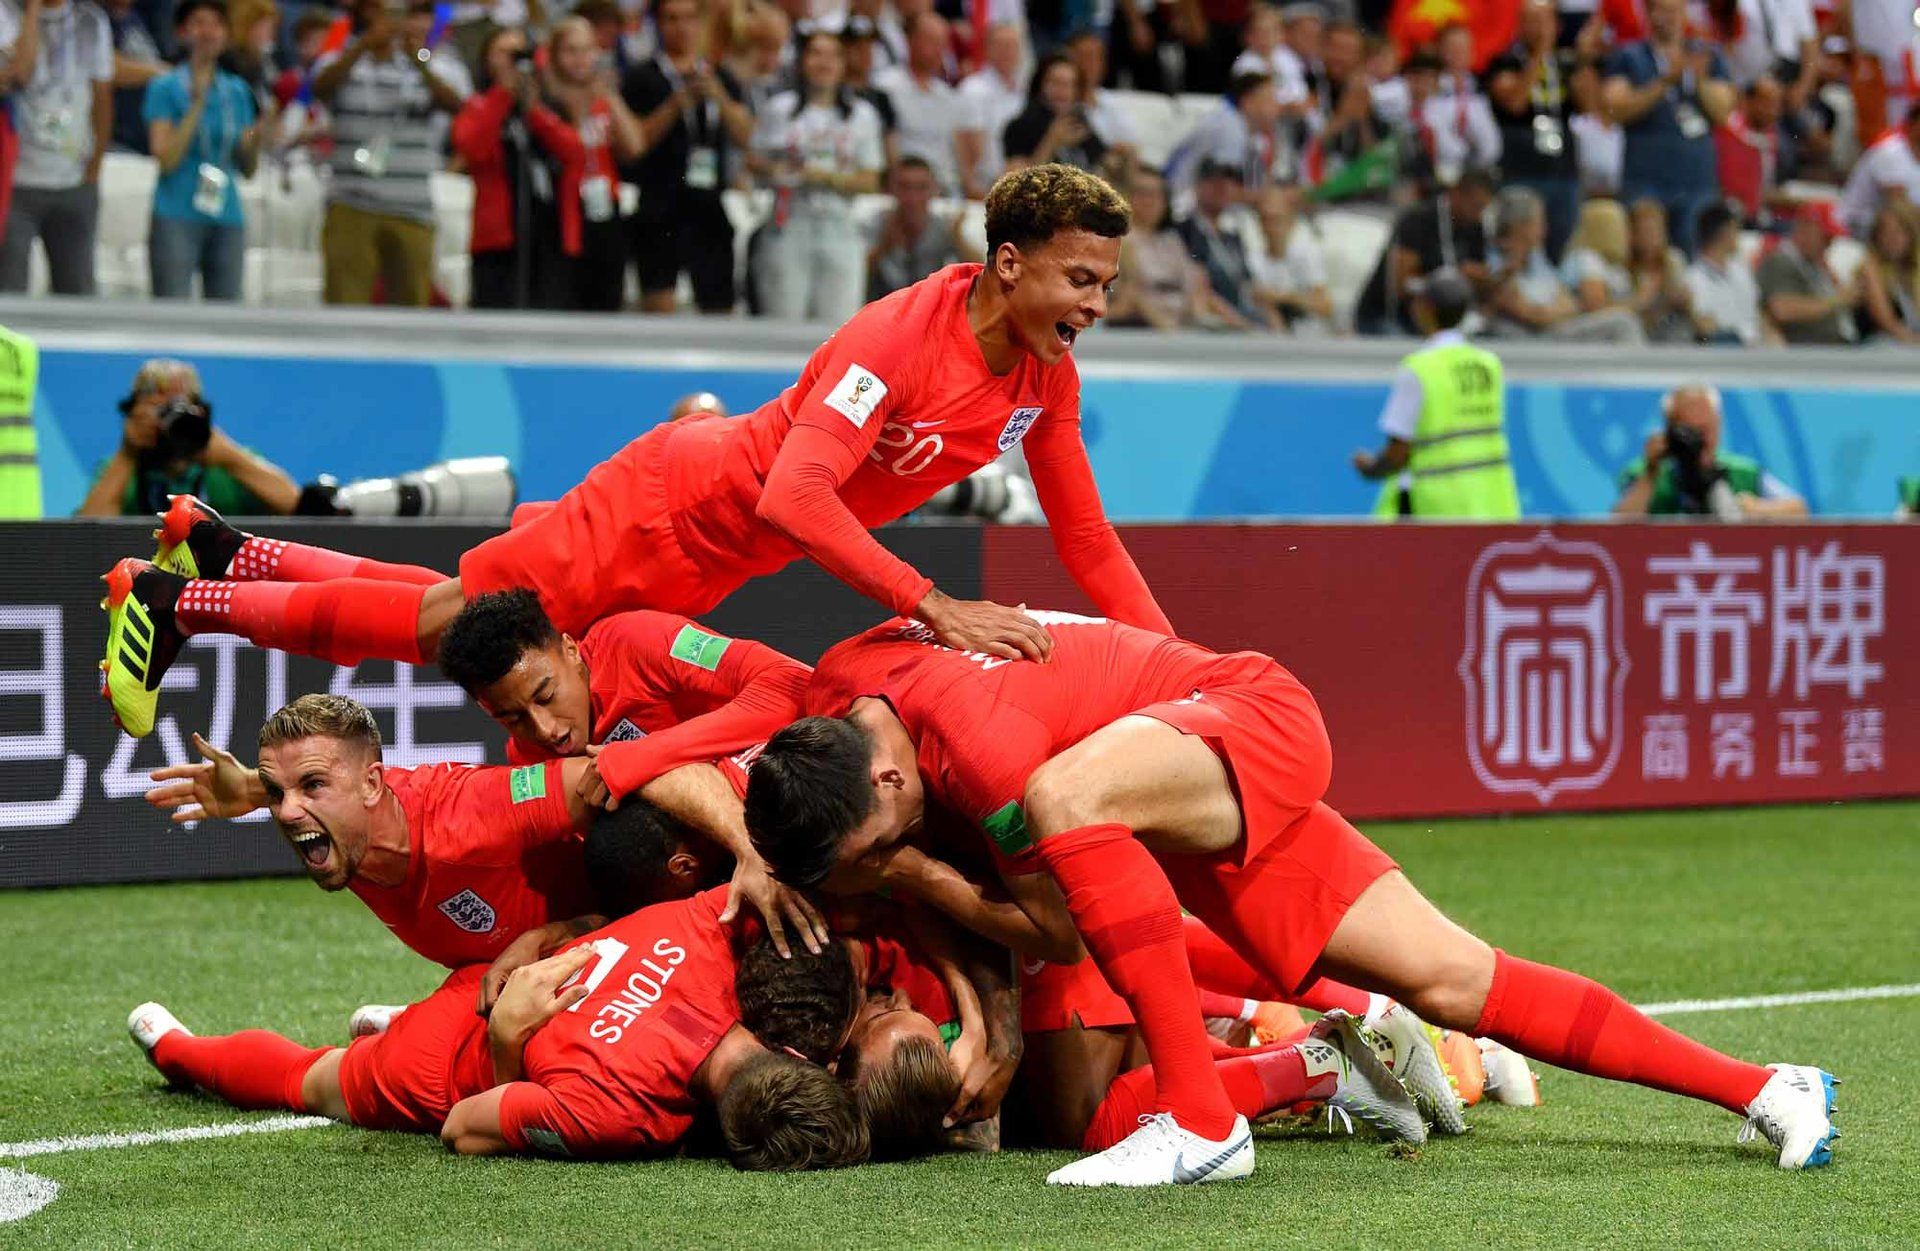 The most mesmerizing photo from the World Cup. England football, England football team, Midfielder soccer